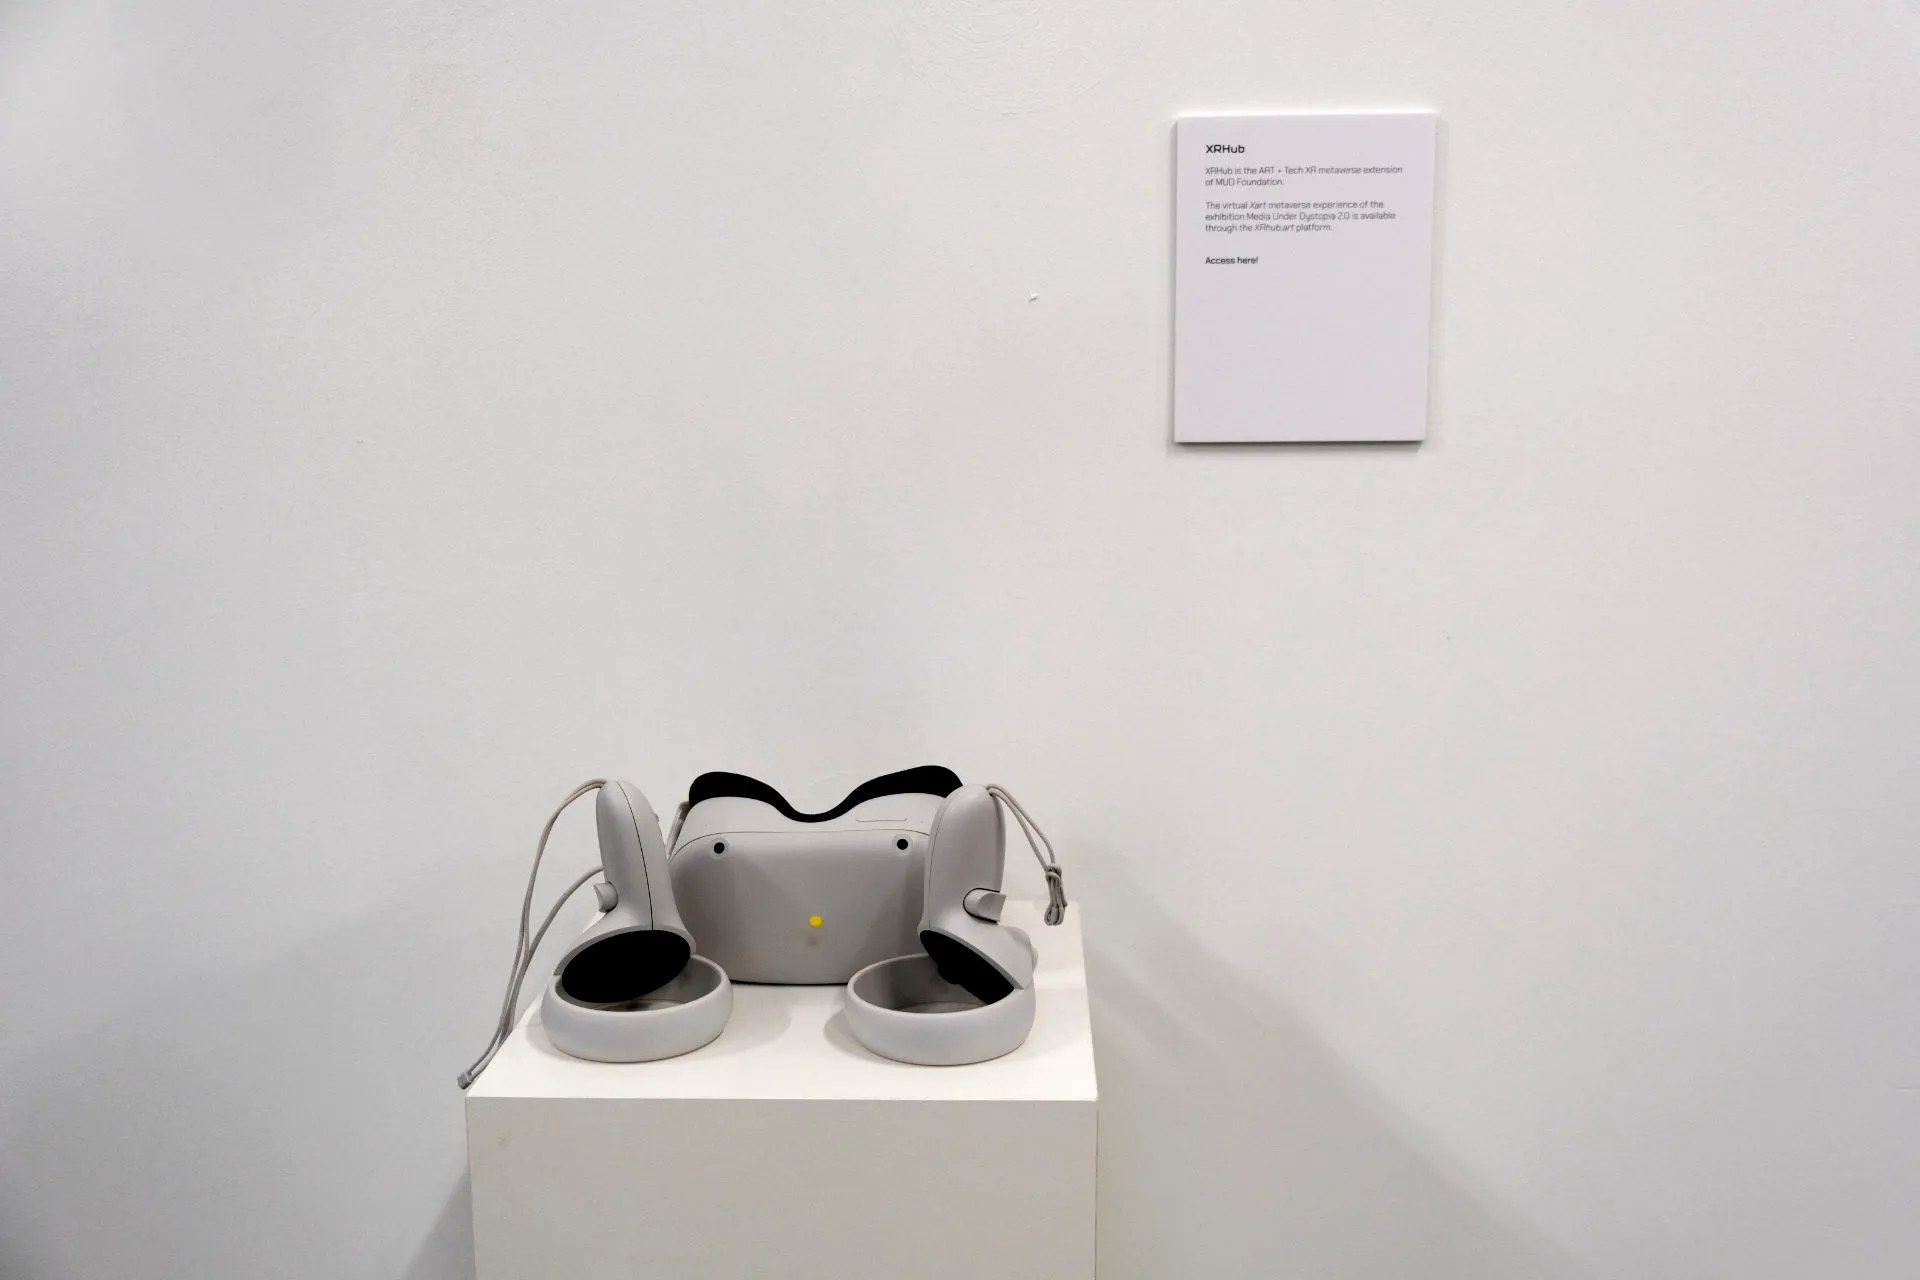 An Oculus and its two controllers on a pedestal, above a label defining the XRHub description